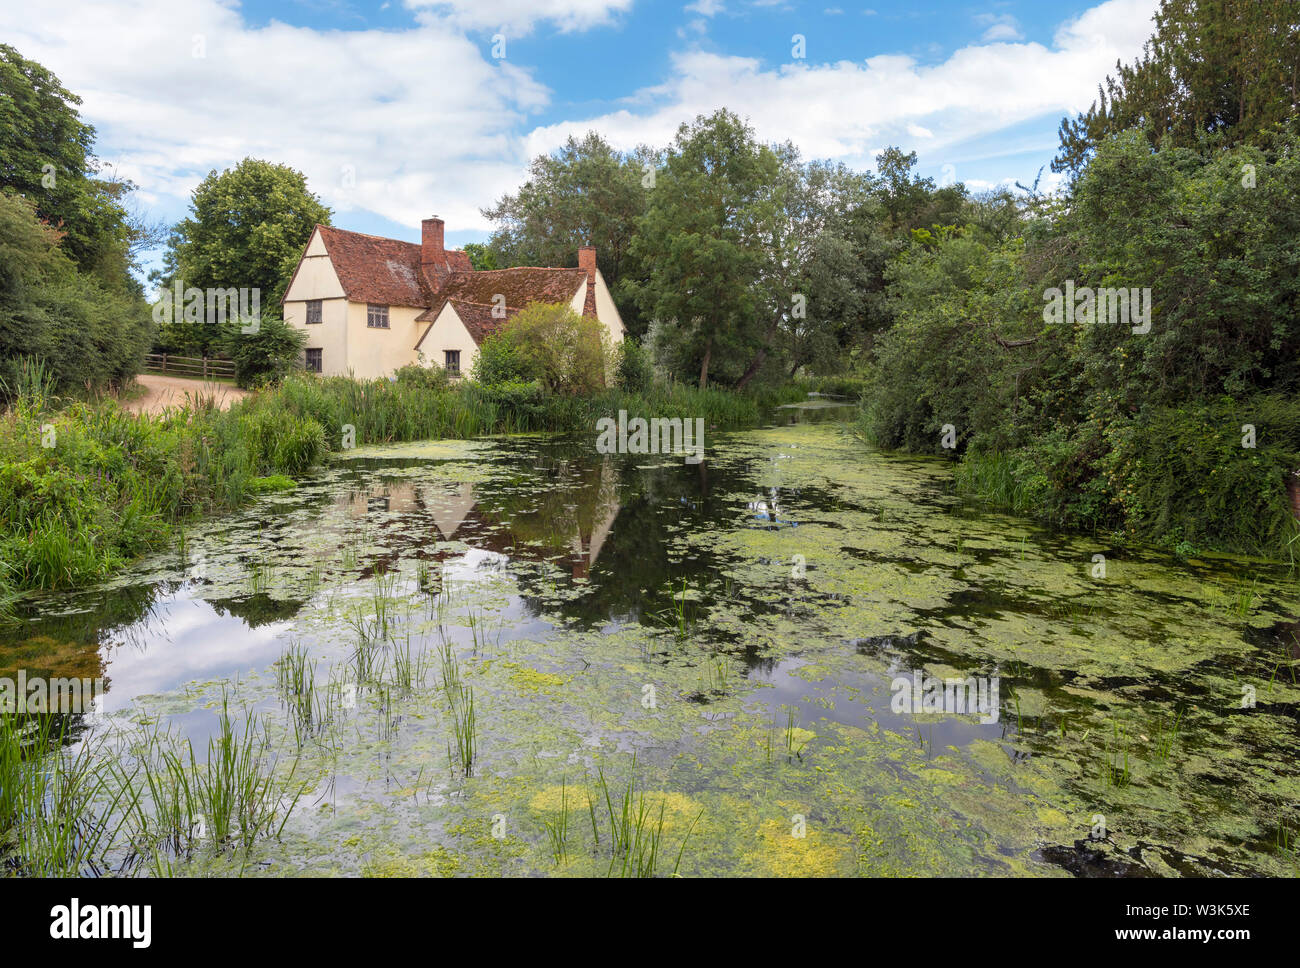 Willy Lott’s Cottage on the River Stour at Flatford Mill, featured in Constable’s Hay Wain, East Bergholt, Essex, England, UK Stock Photo